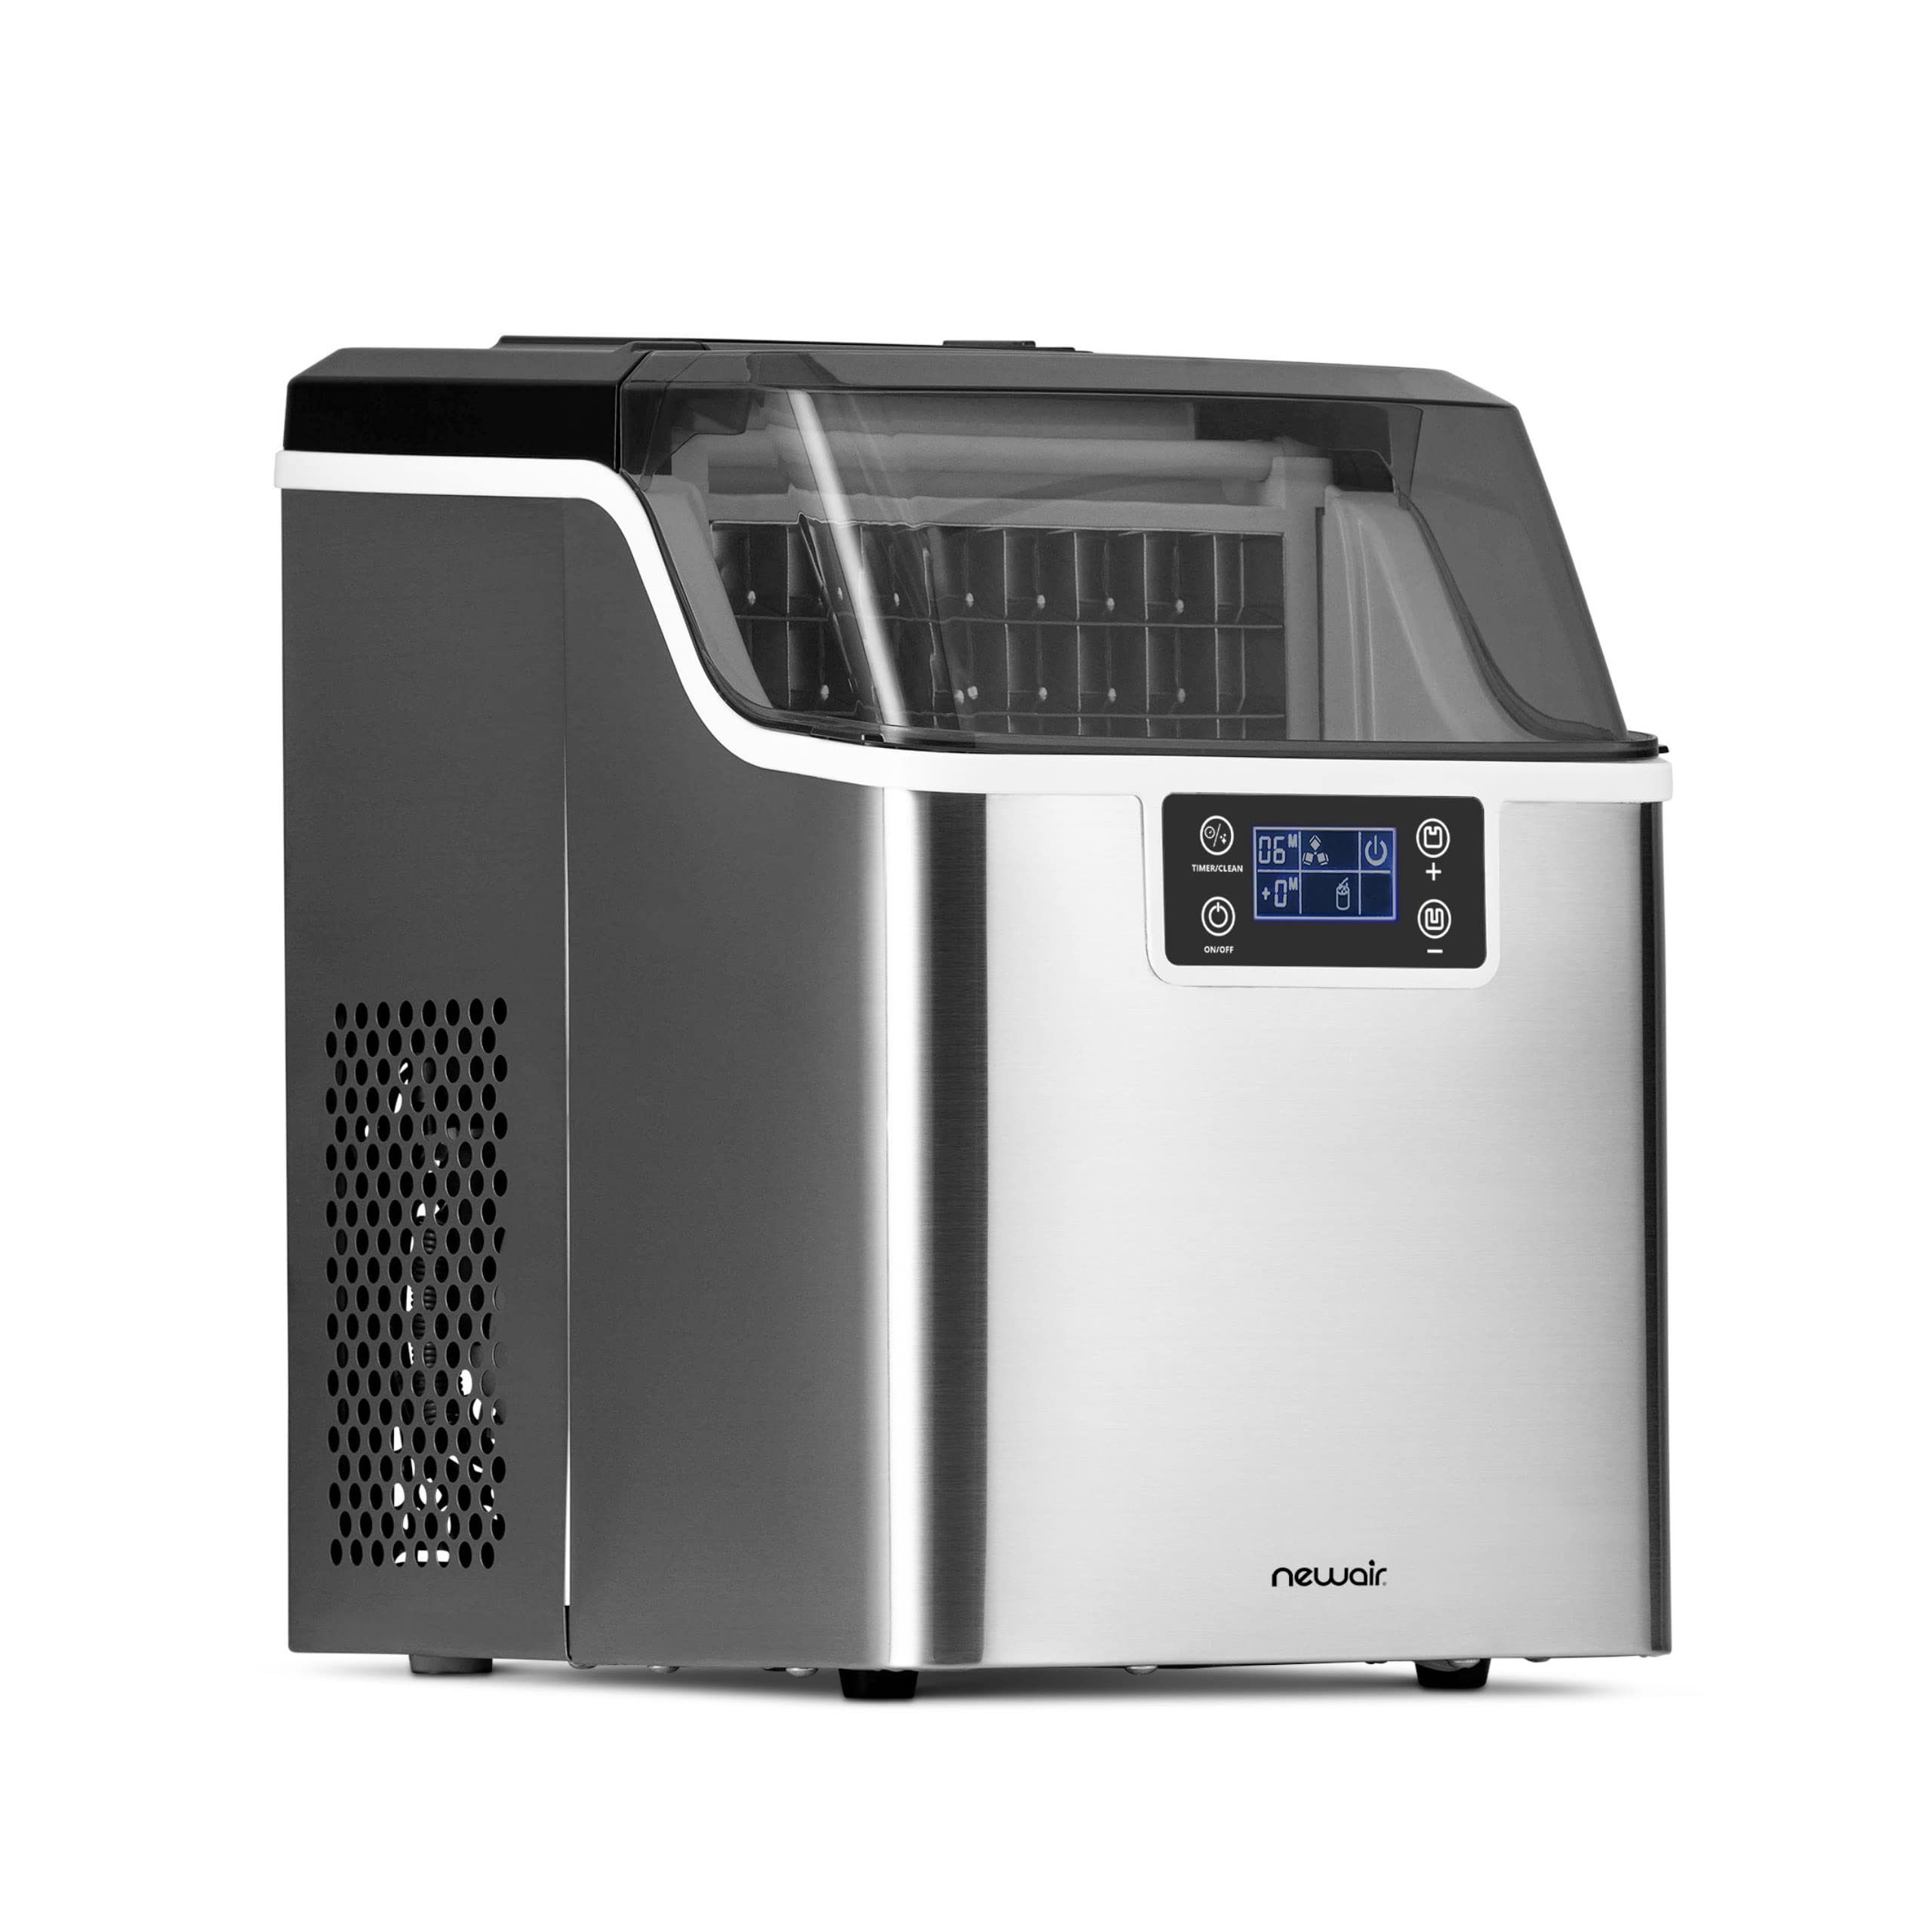 NewAir 45 lbs. Portable Countertop Clear Ice Maker with FrozenFall Technology, Custom Ice Thickness Controls, 24 Hour Timer, Large Viewing Ice Window, Perfect for Cocktails, Scotch, Soda